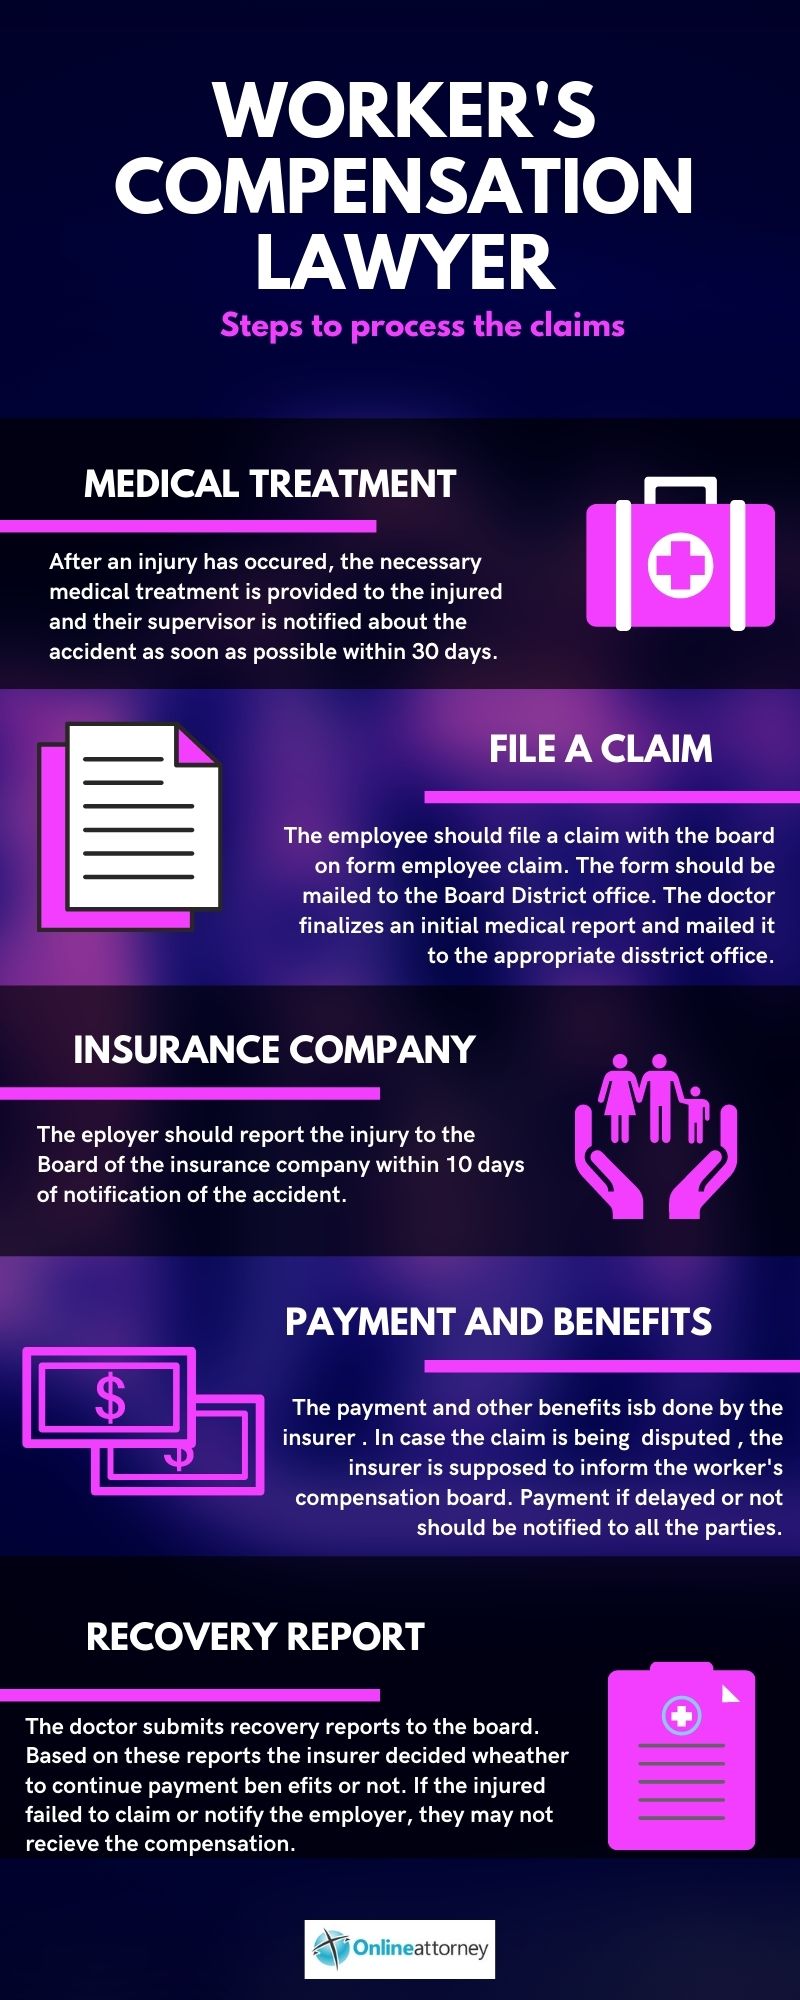 Worker's Compensation Lawyer